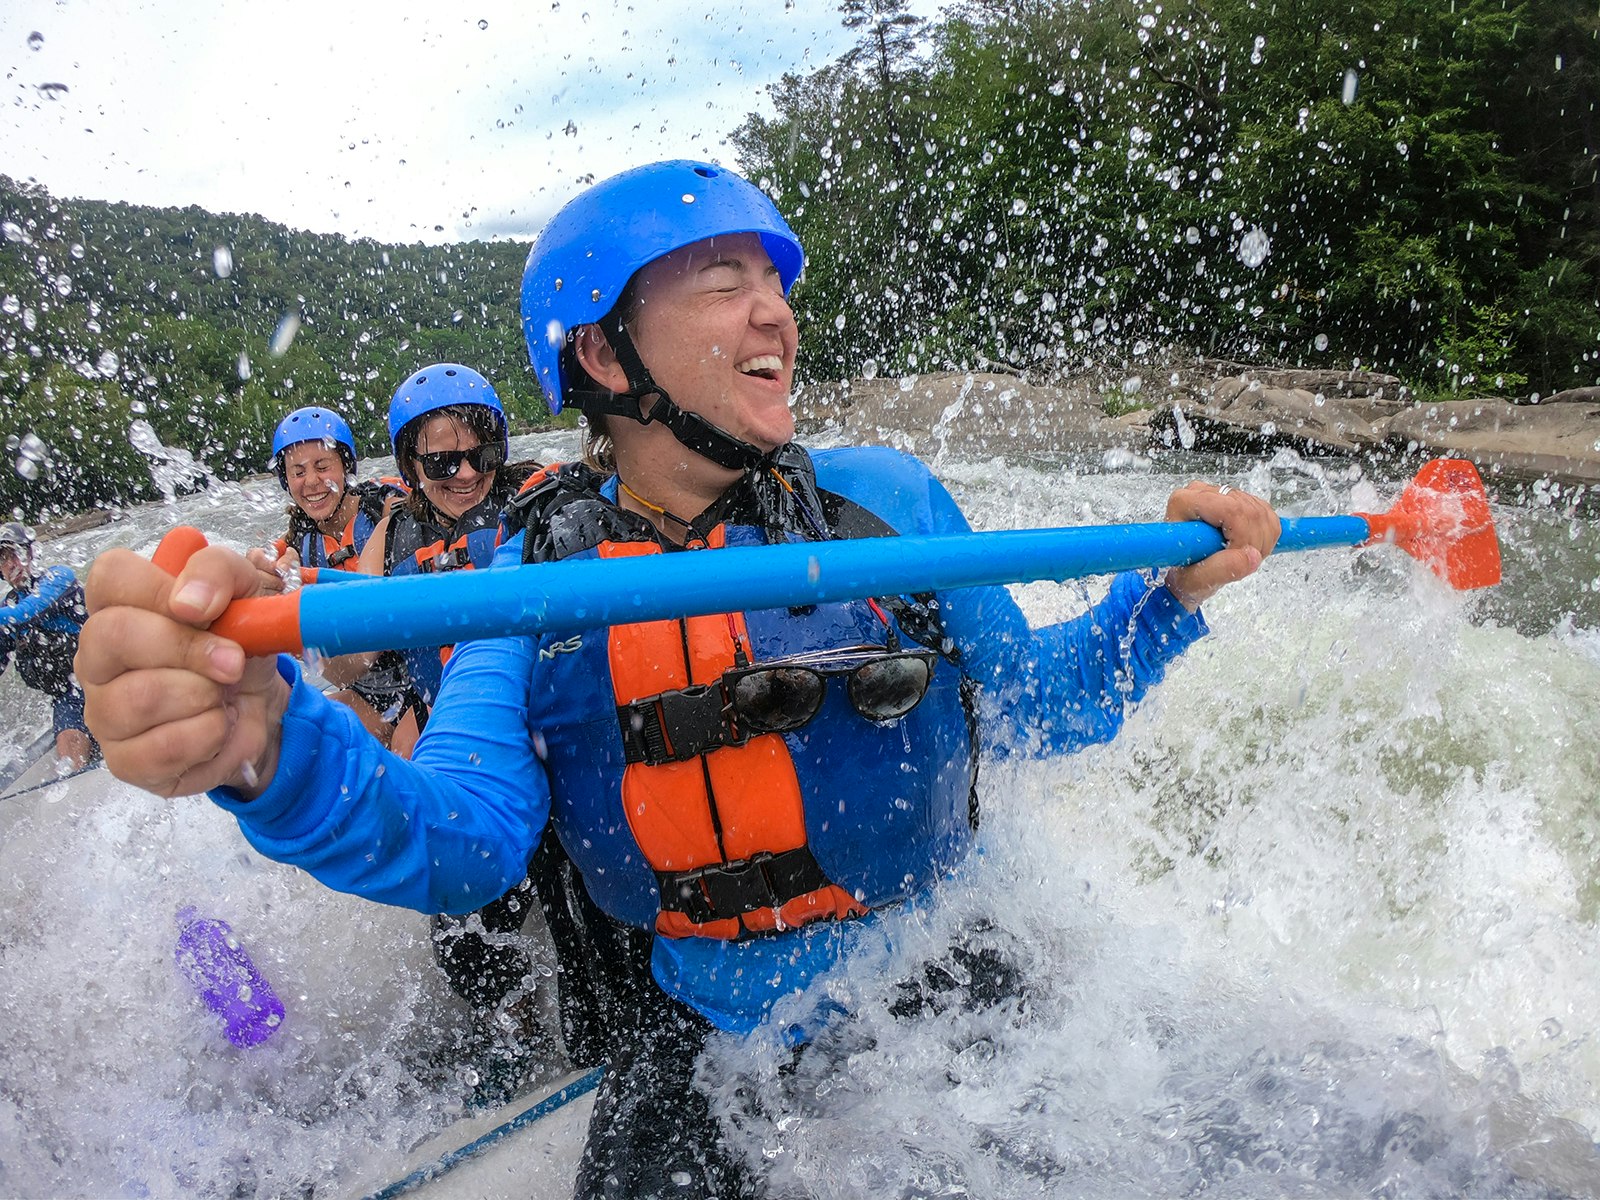 Three women wearing blue and orange life jackets and blue helmets paddle into whitewater on an early fall day on the Gauley River in West Virginia